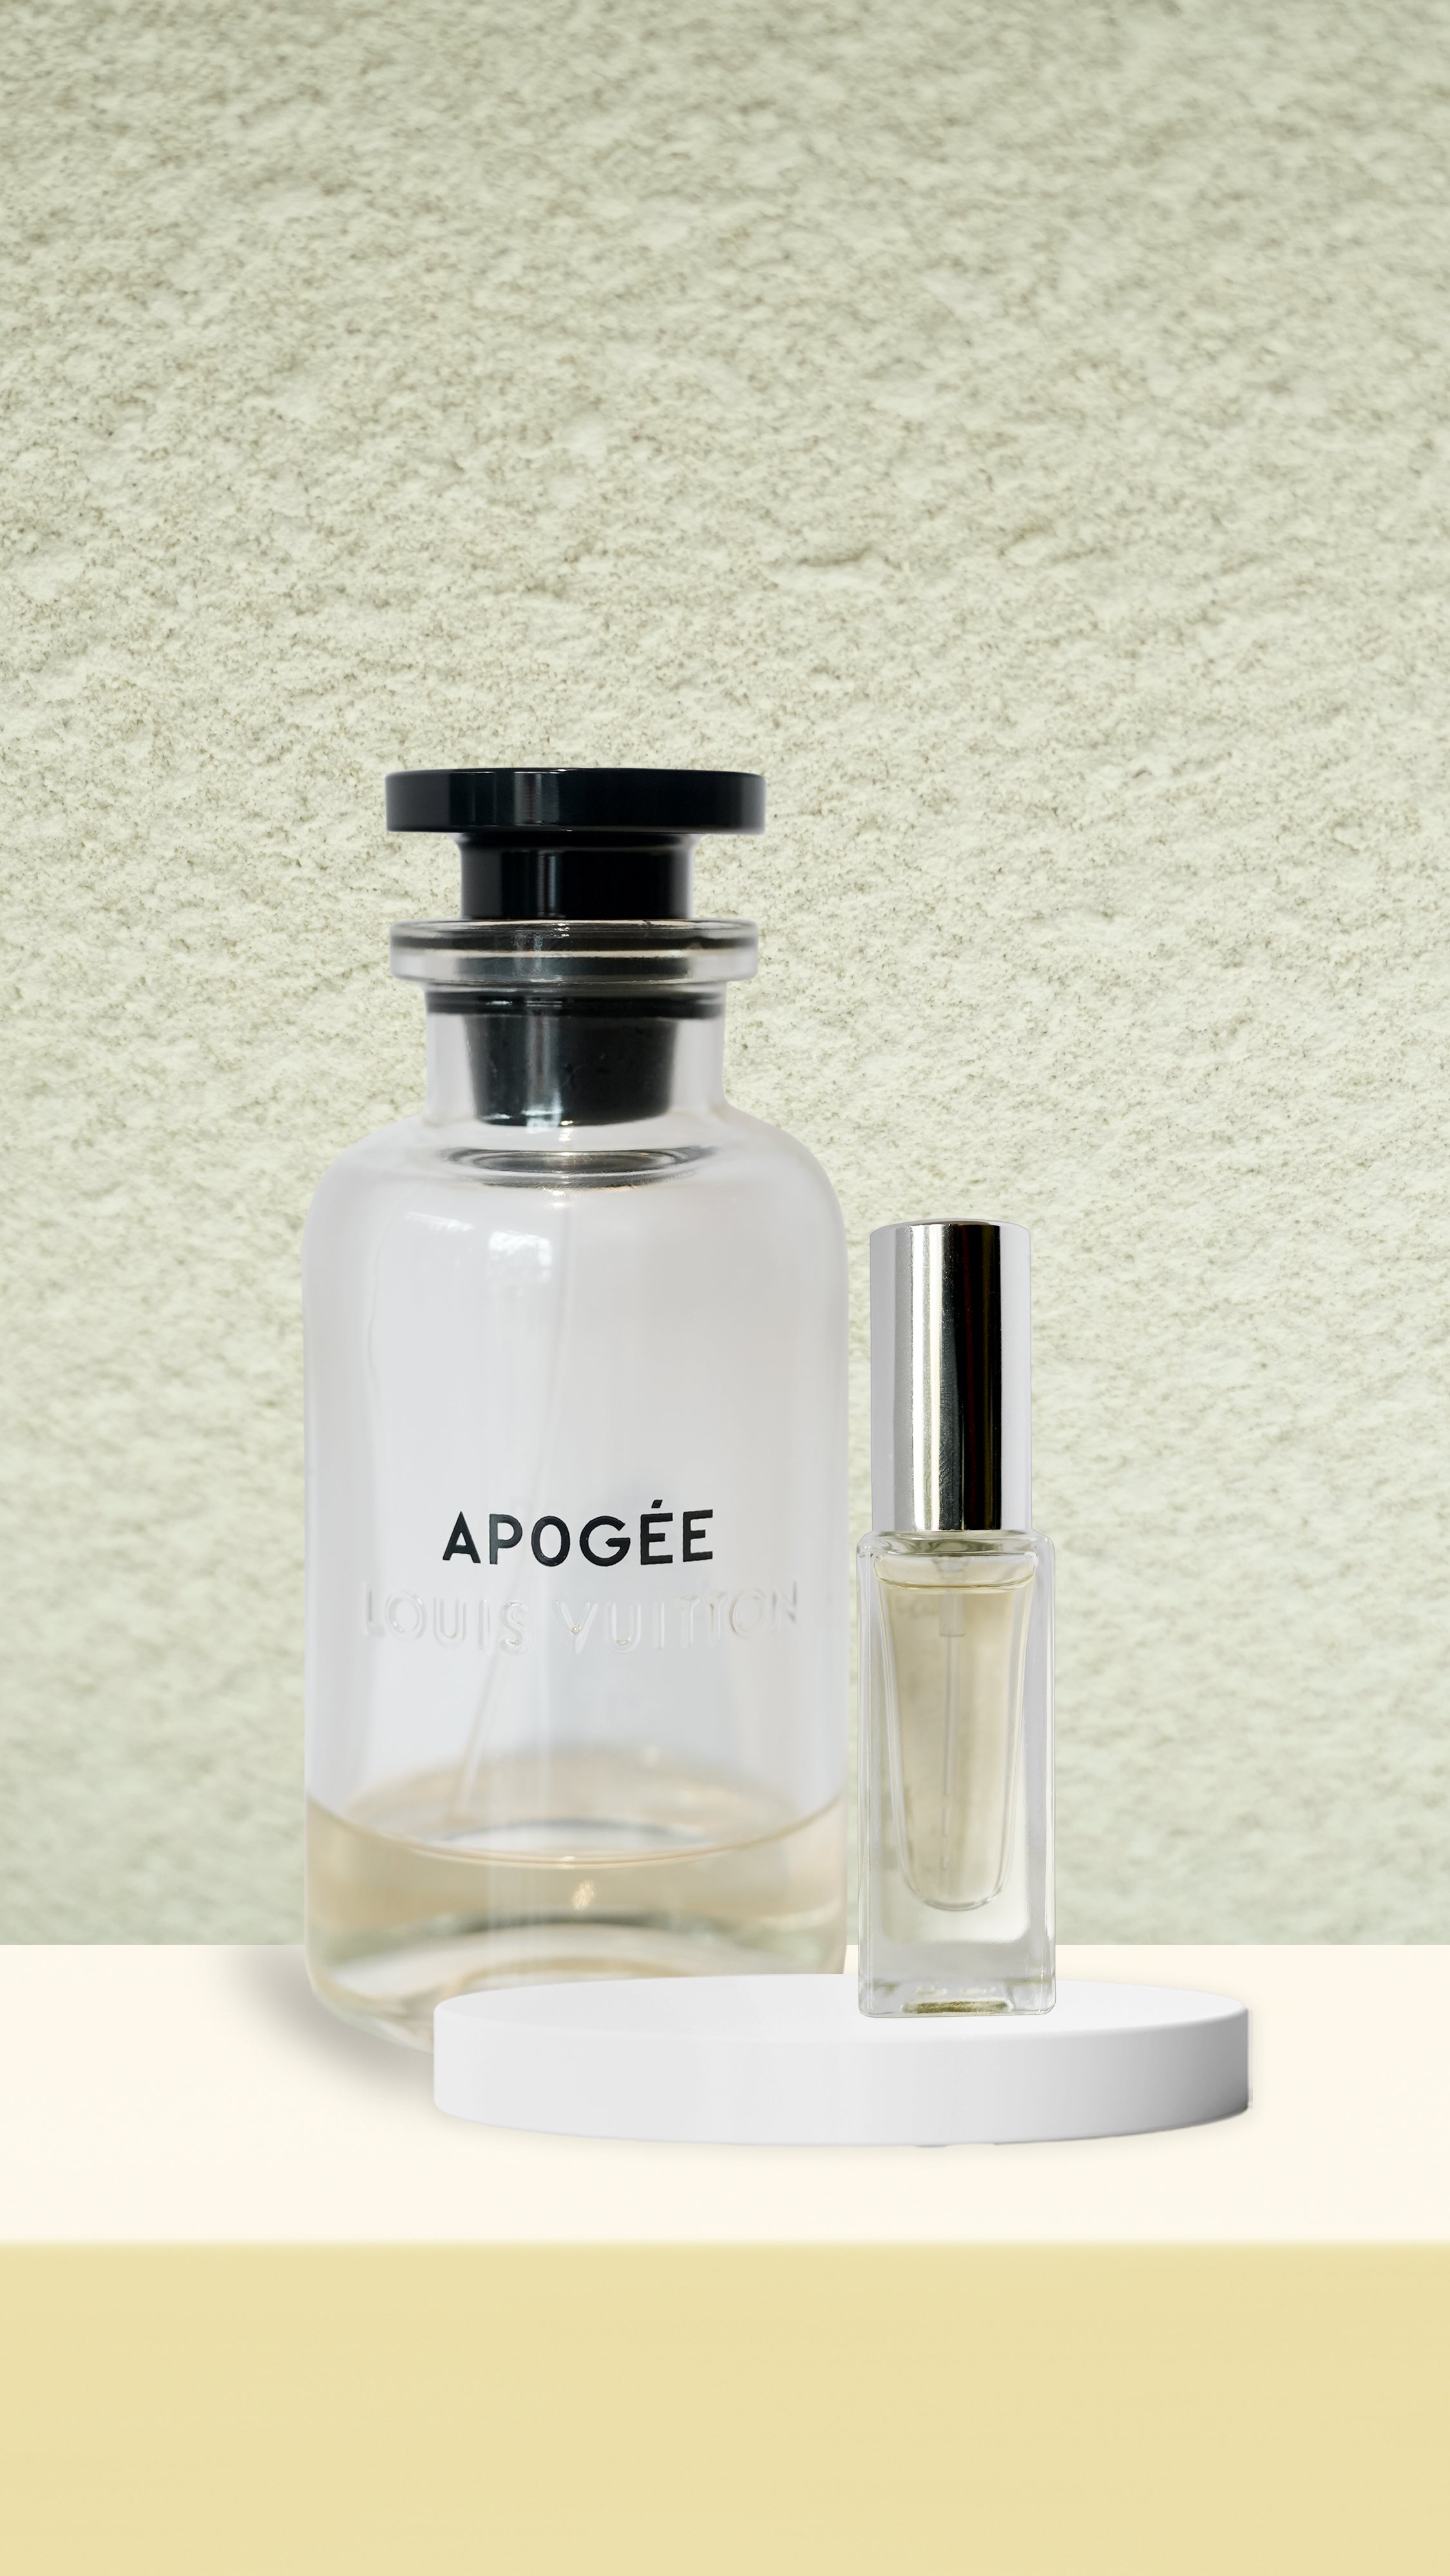 Apogee by Louis Vuitton for Women